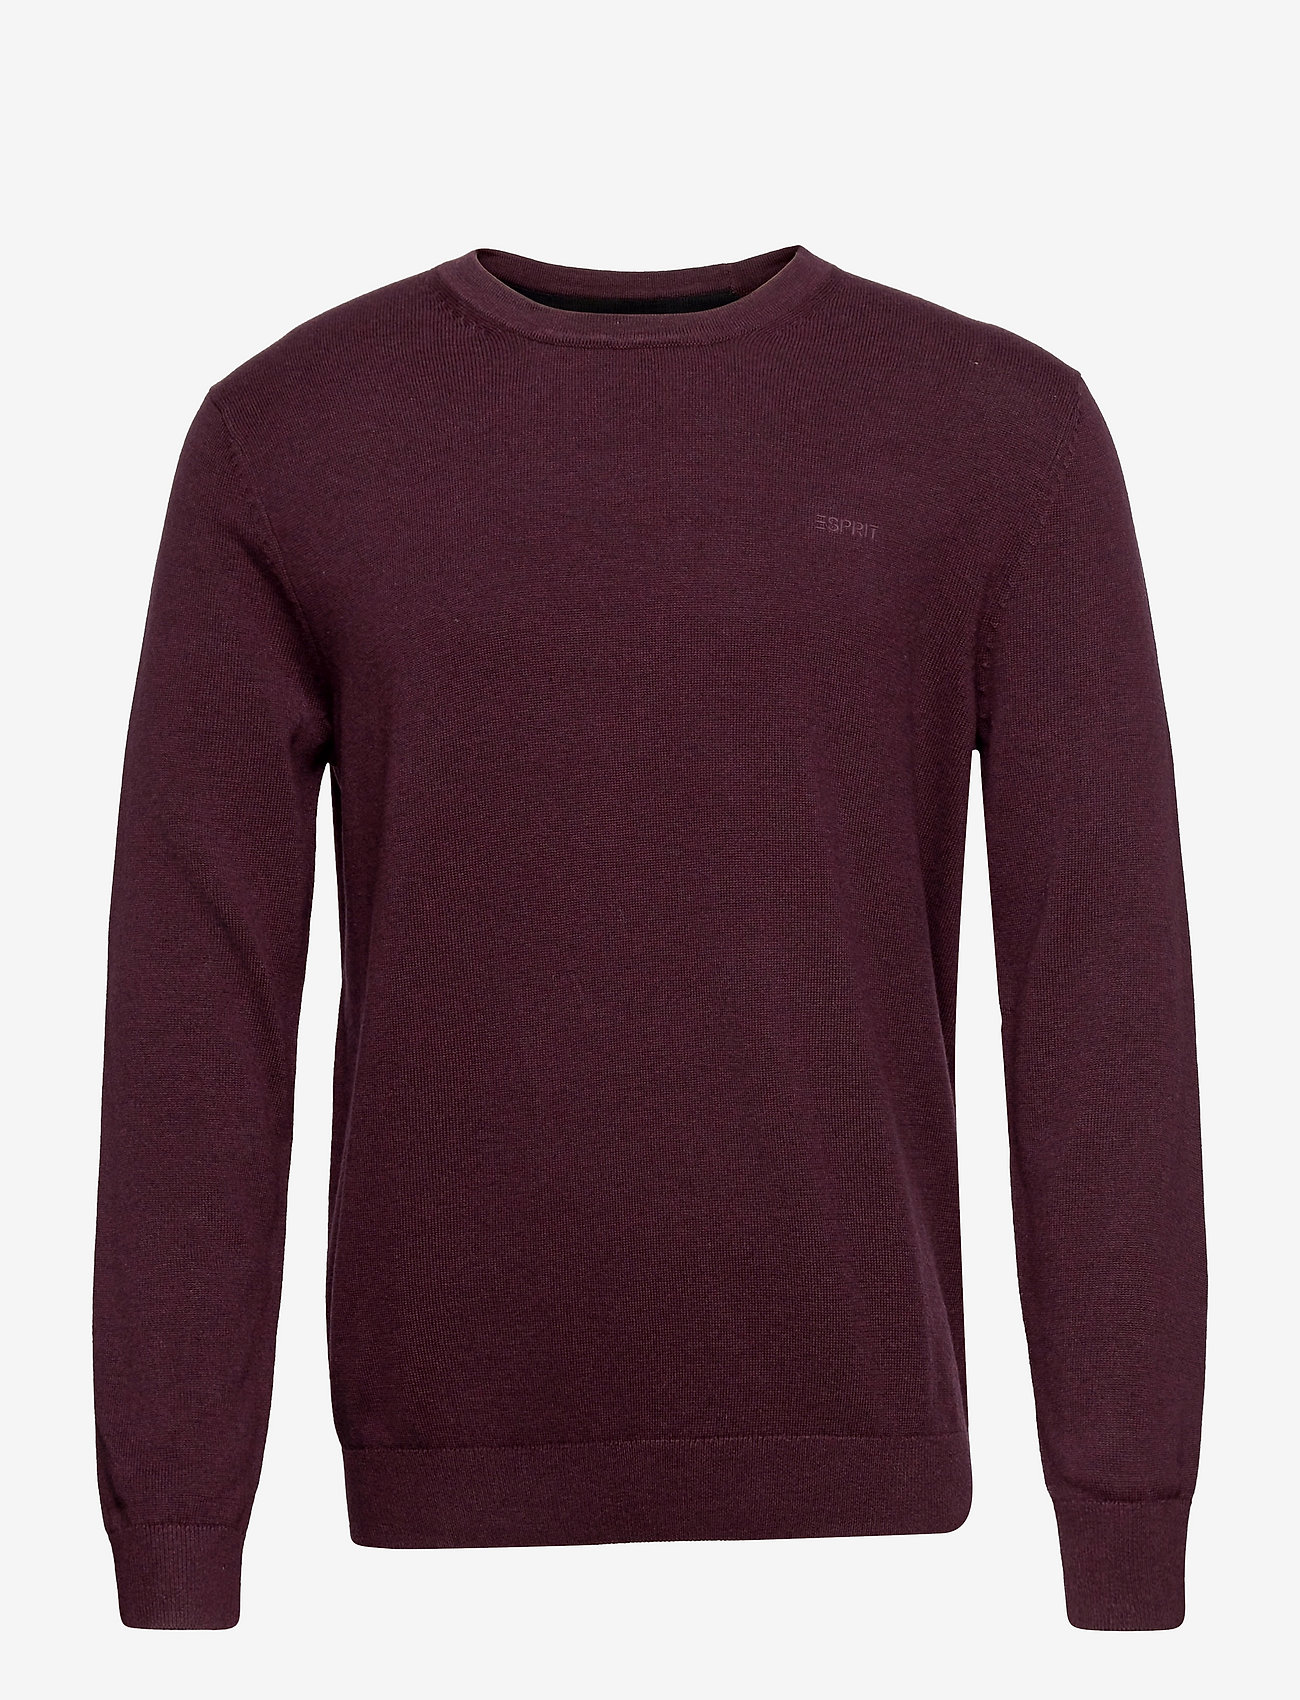 Esprit Casual - Sweaters - rund hals - bordeaux red 5 - 0